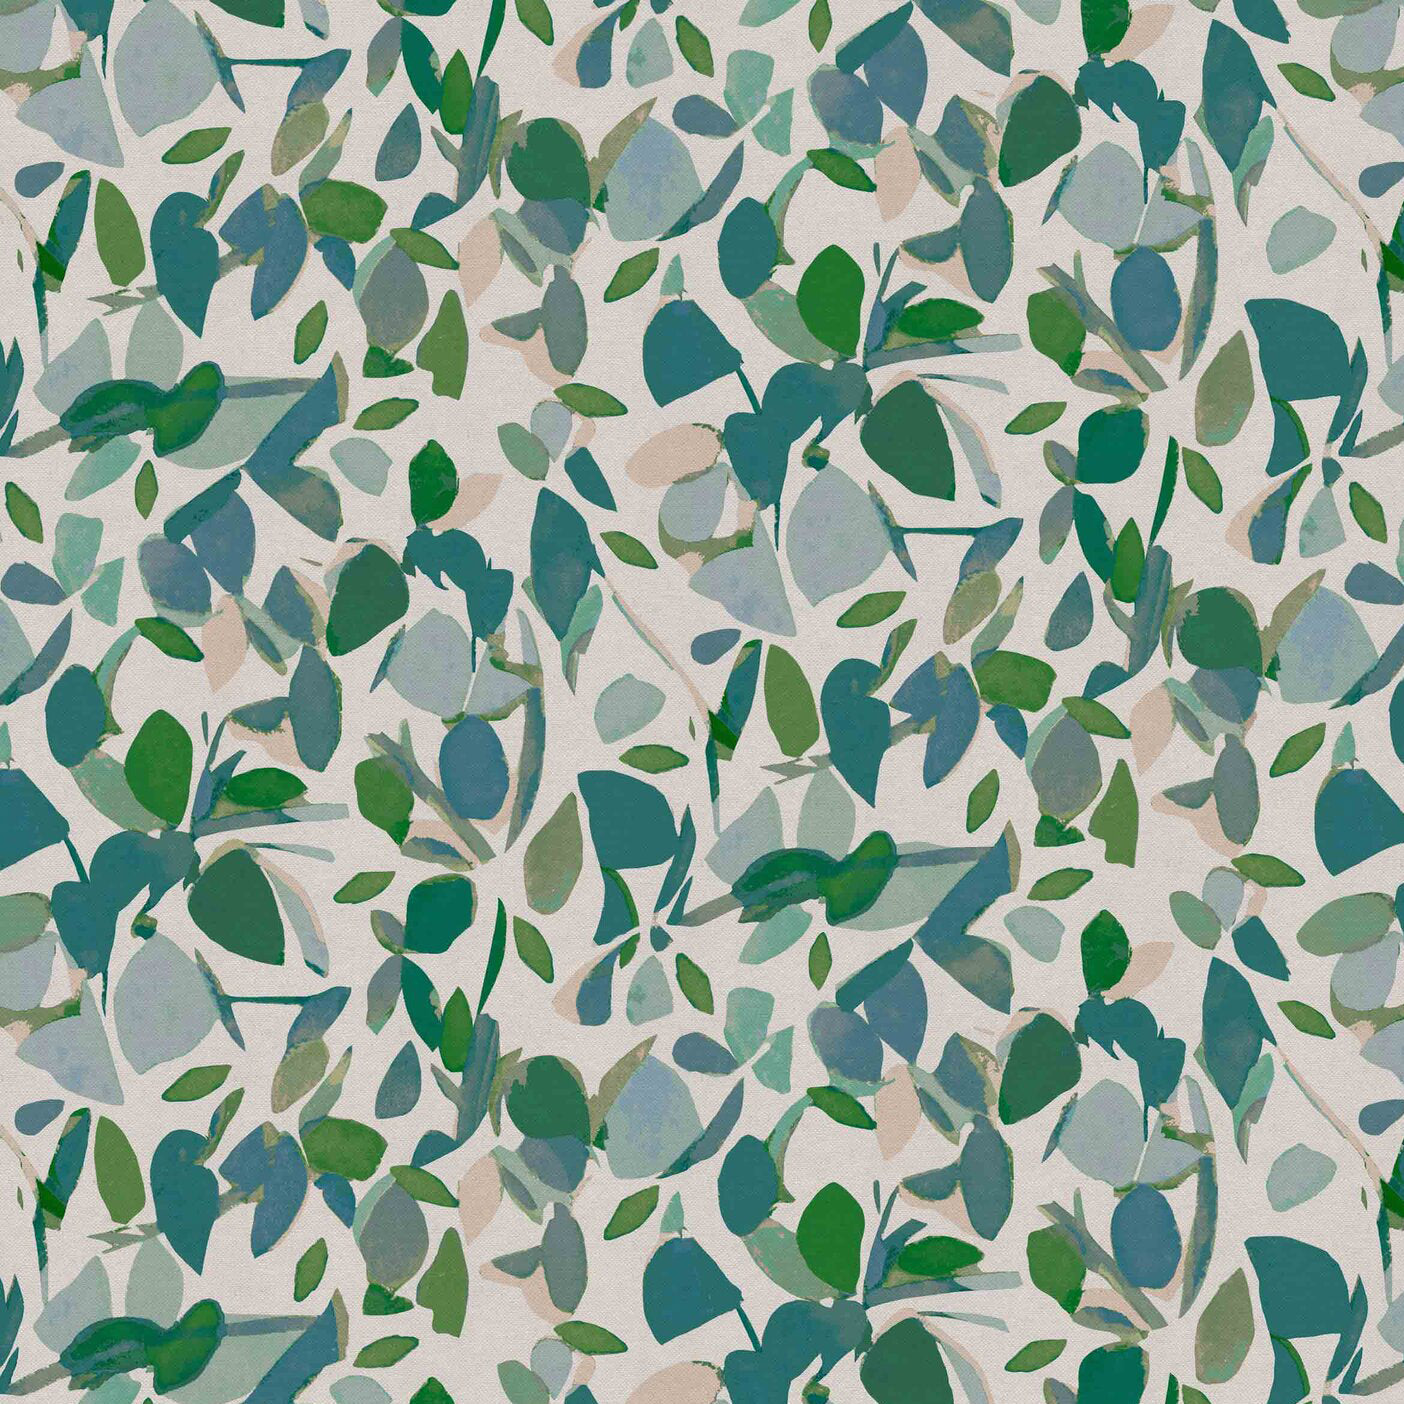 Detail of fabric in a minimal leaf print in shades of blue, green and pink on a tan field.